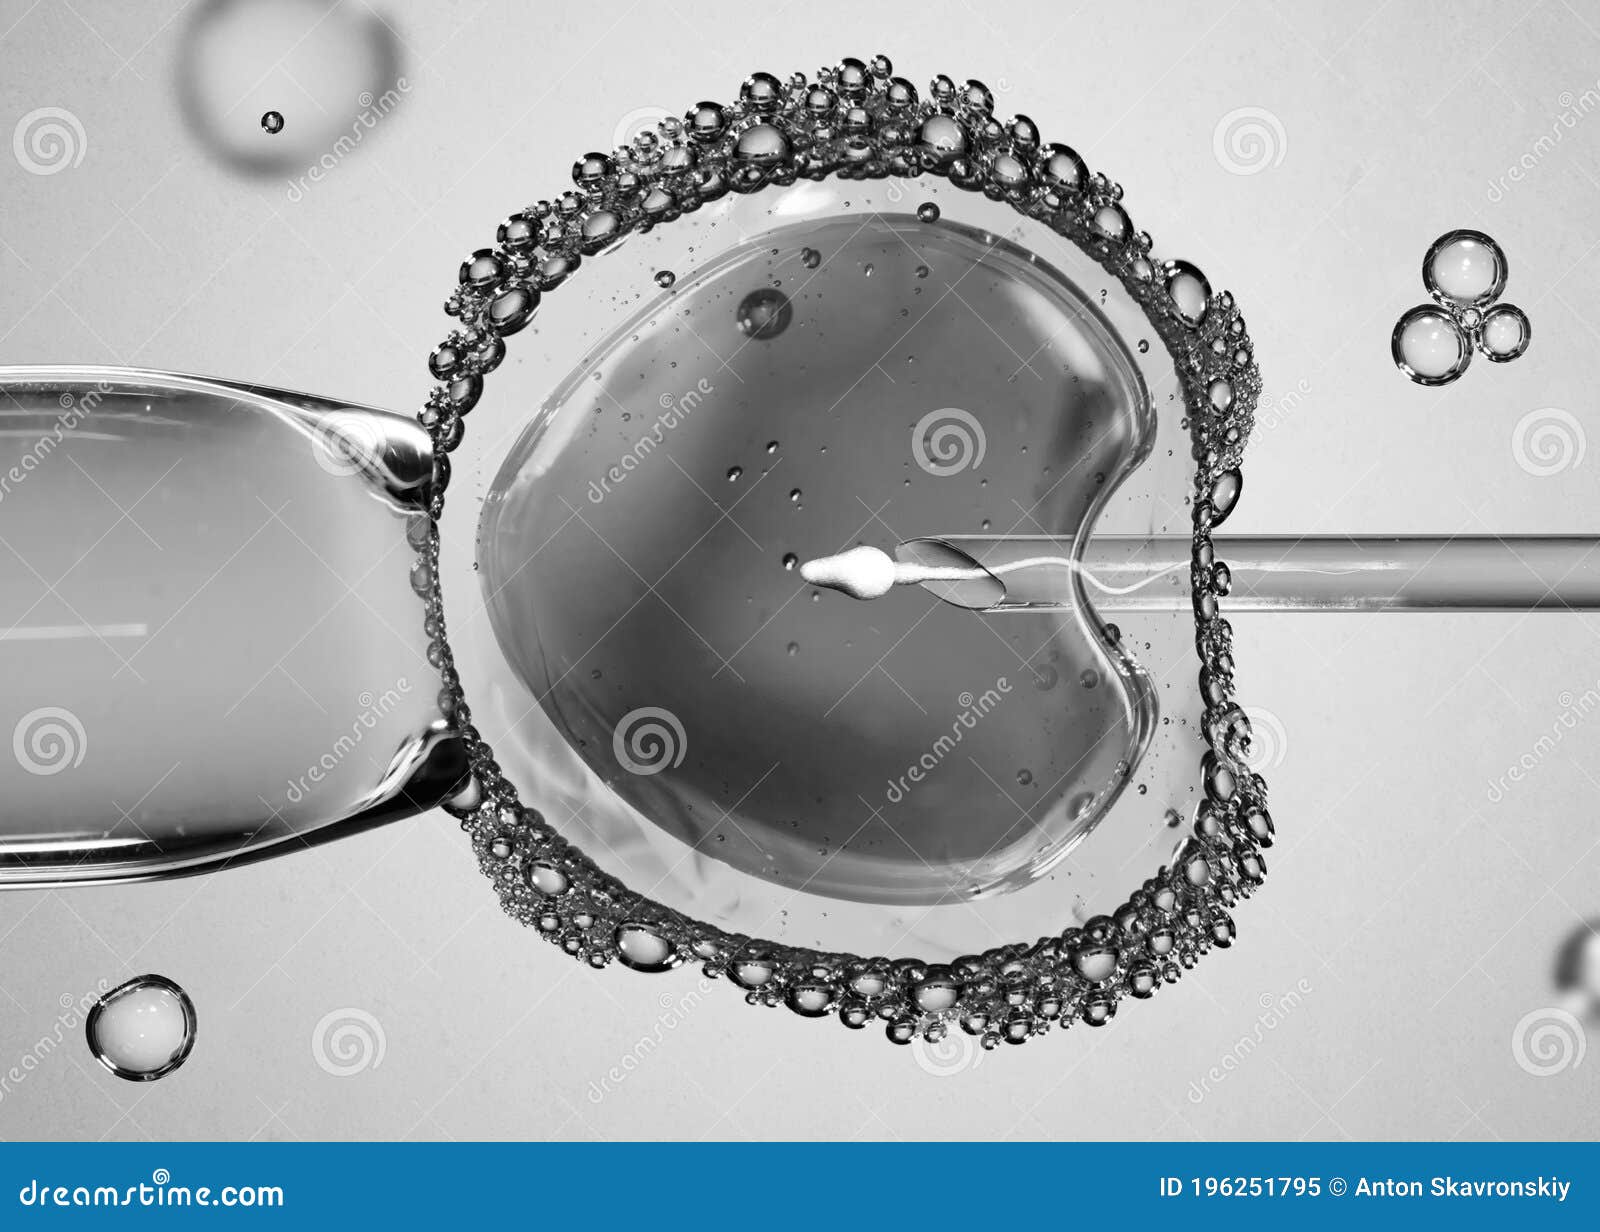 concept of artificial insemination or fertility treatment. image